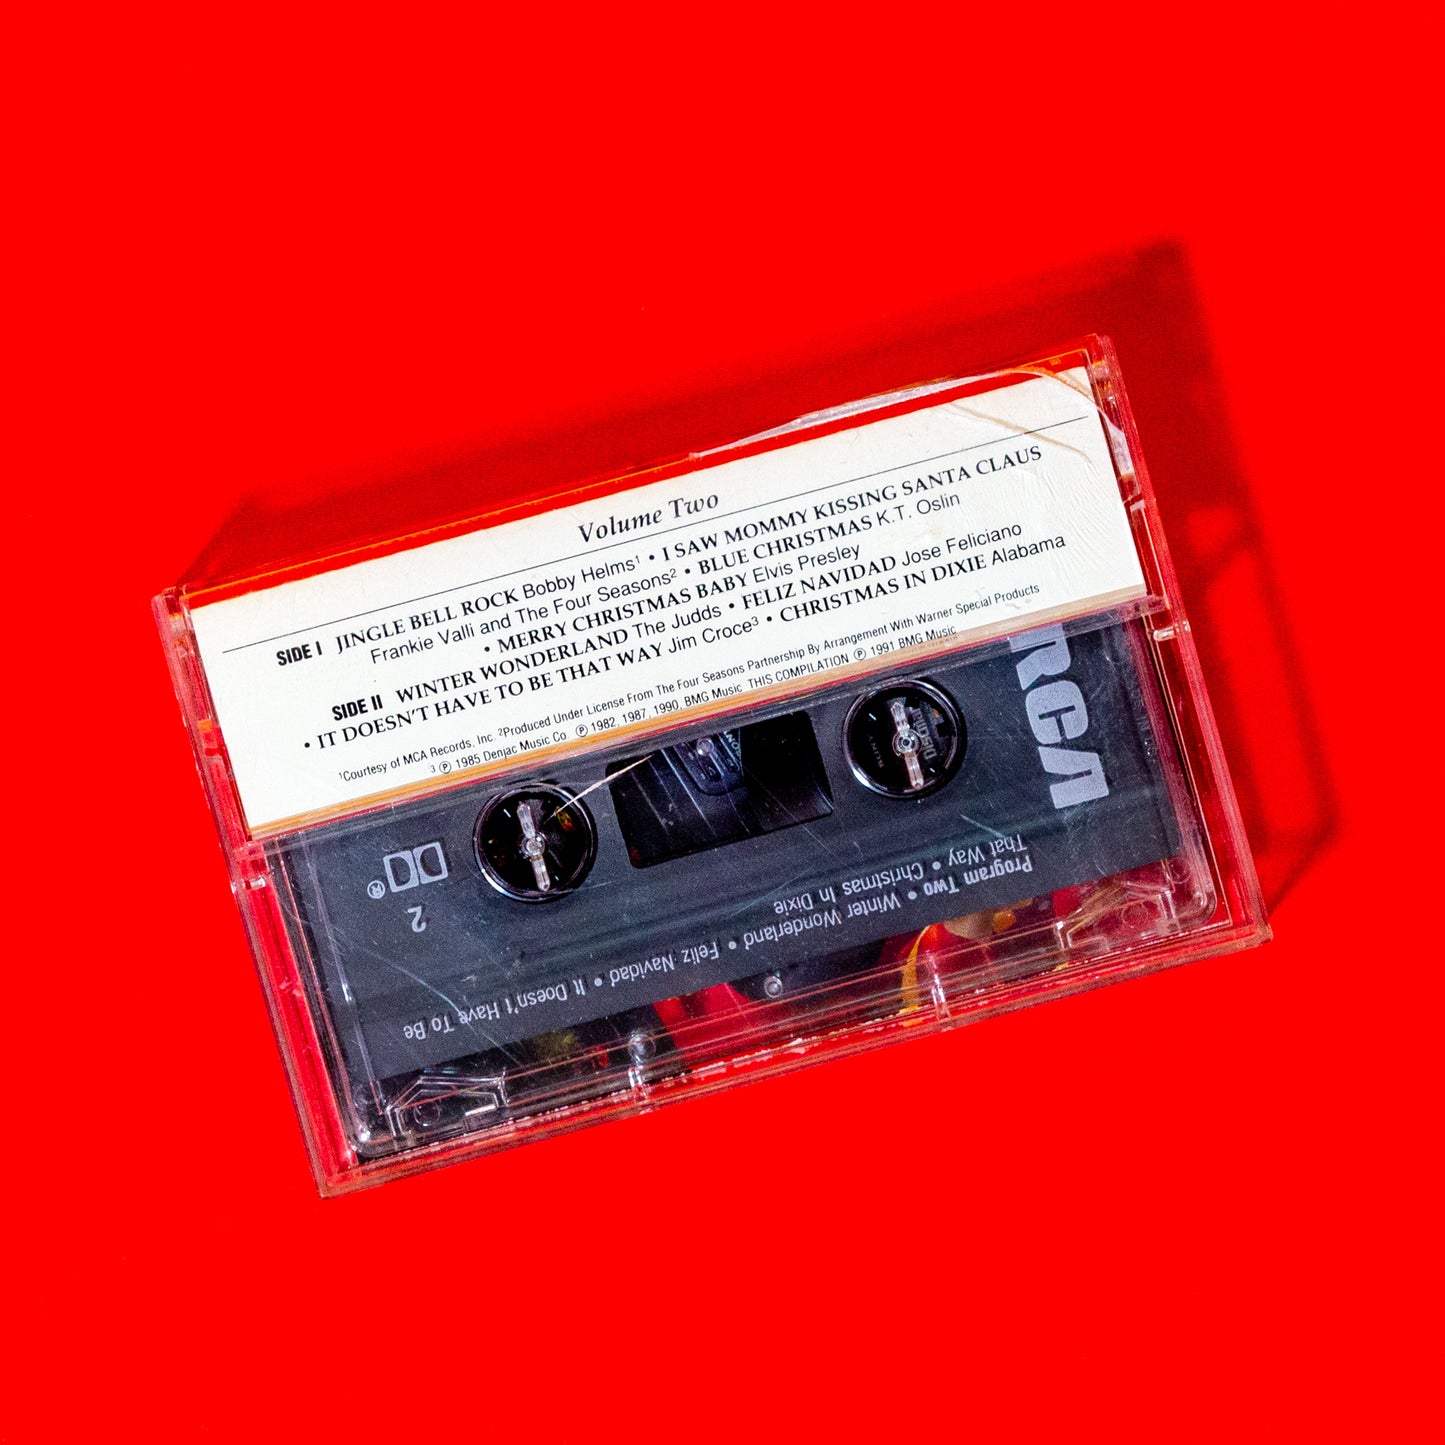 Winston Lights Holiday Music Collection Vol. 2 (Audio Cassette)